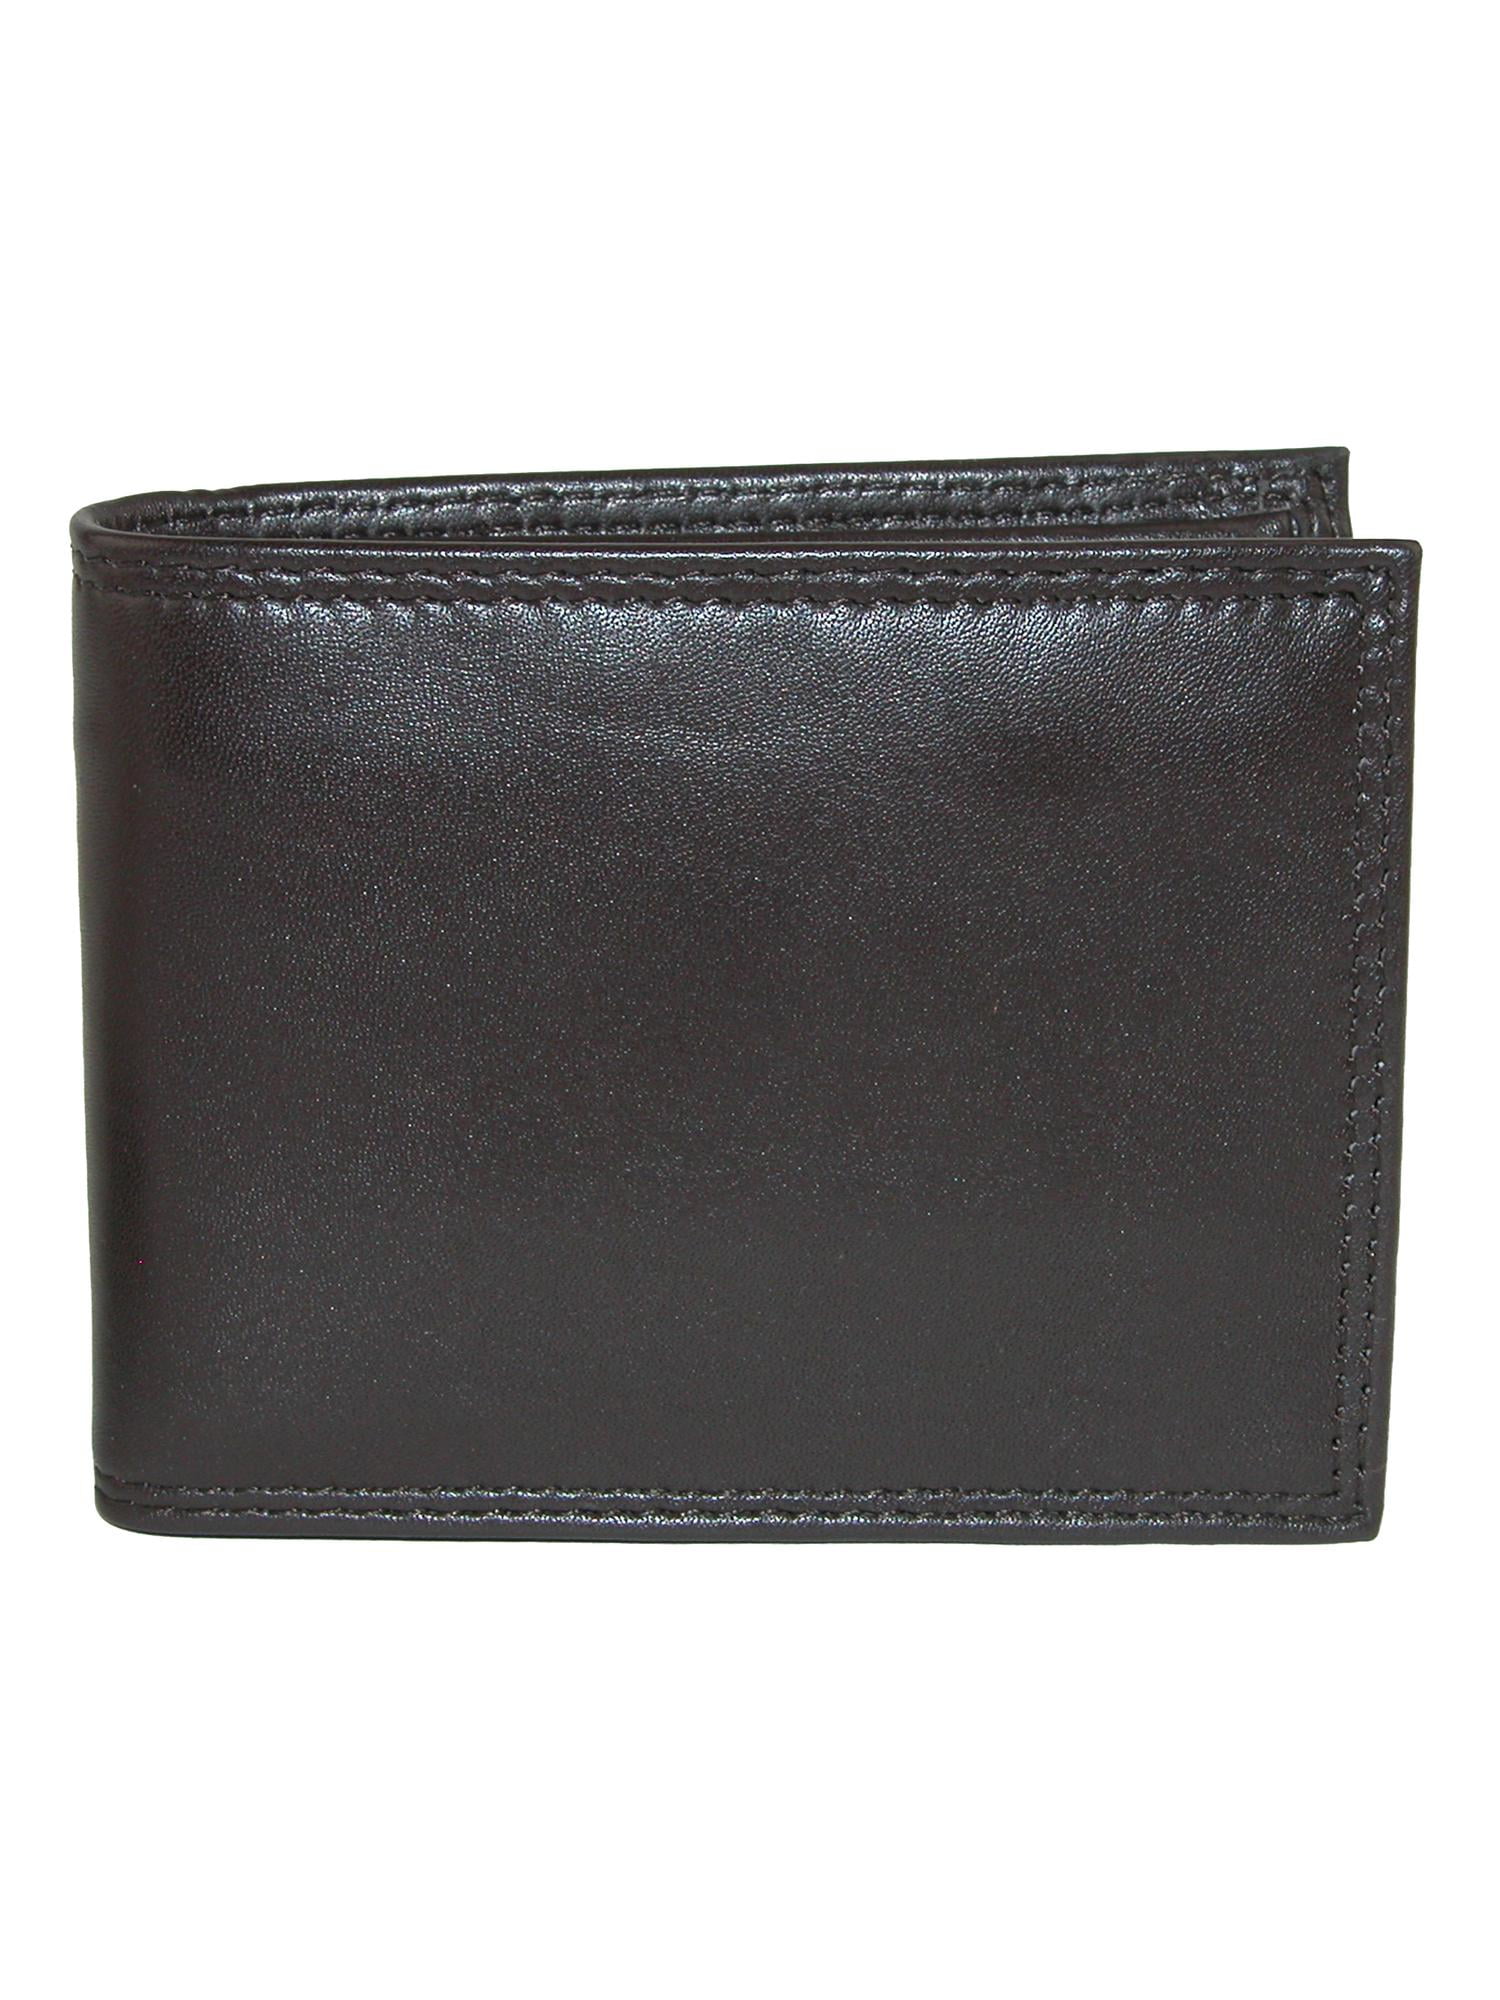 New Buxton Men's Emblem Leather RFID Protected Zip-Around Wallet with ID 